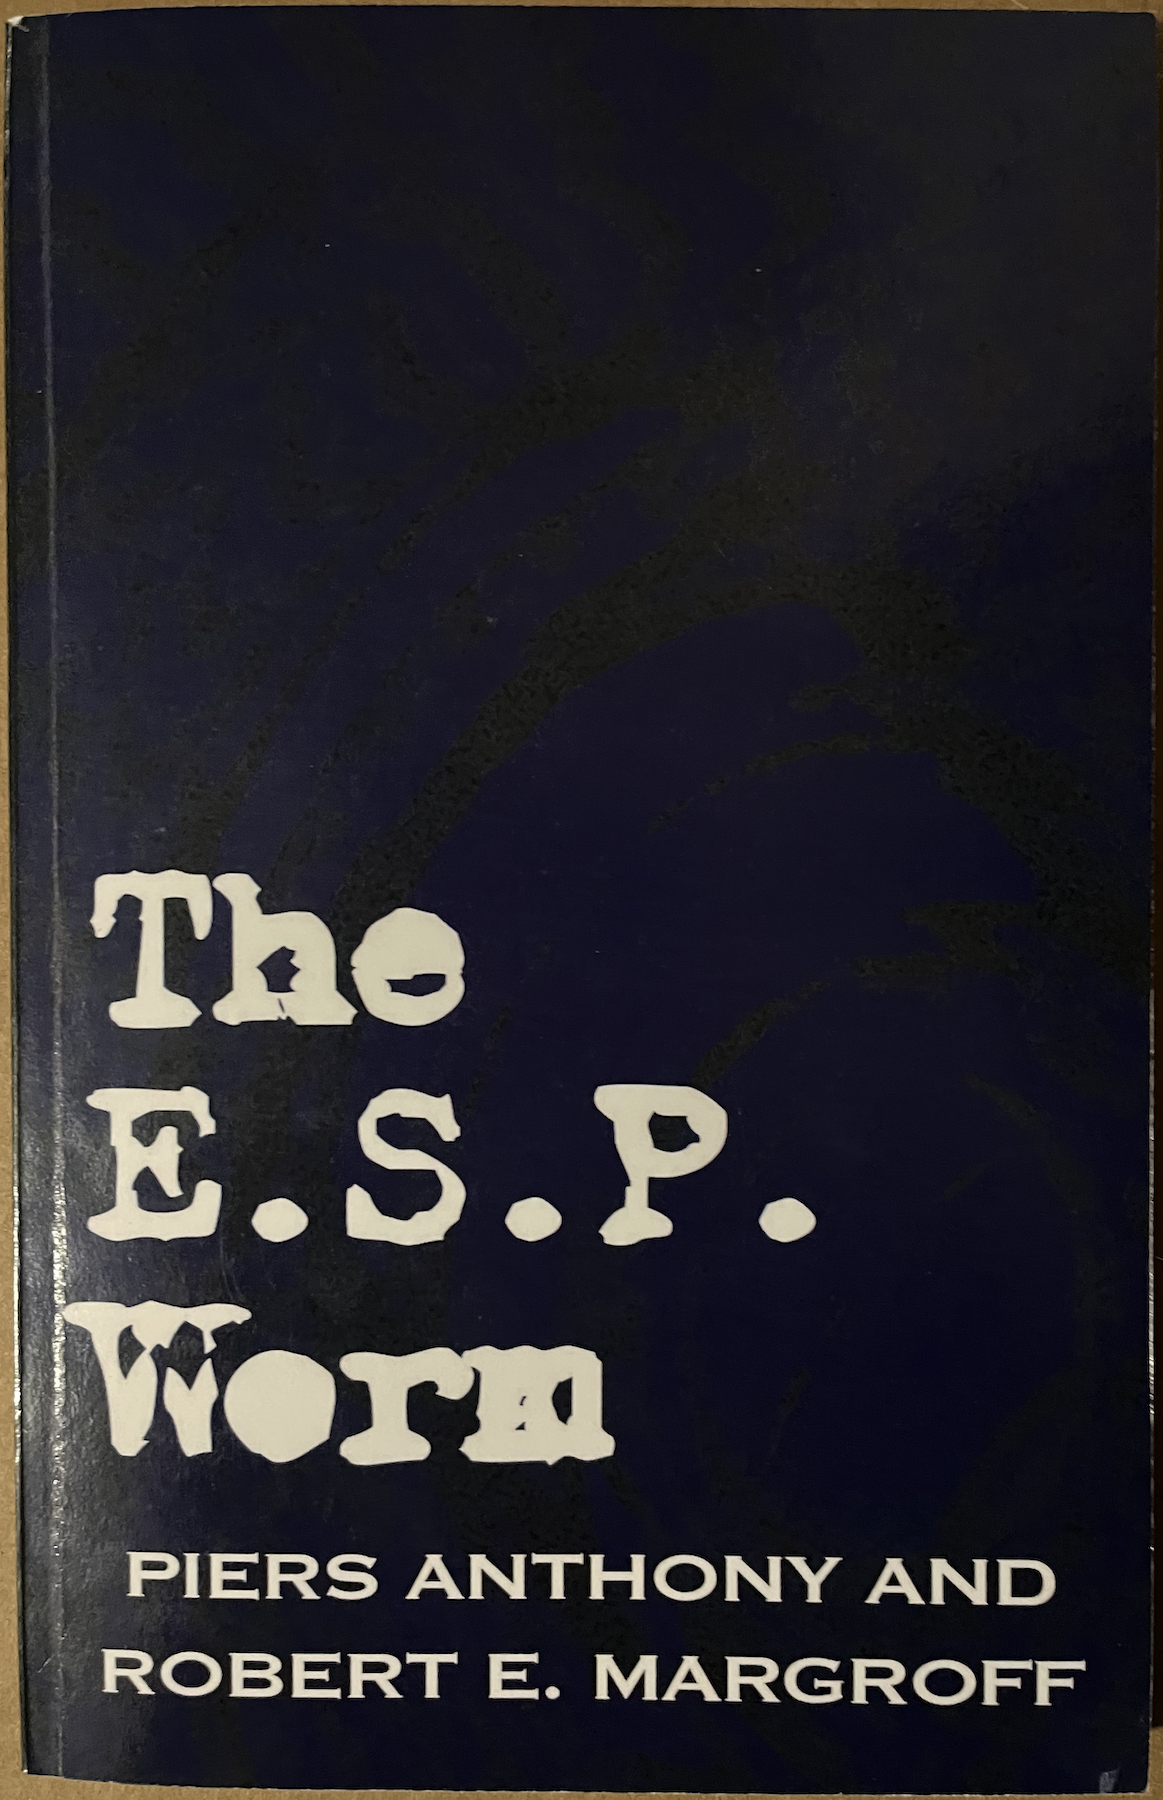 The E. S. P. Worm softcover